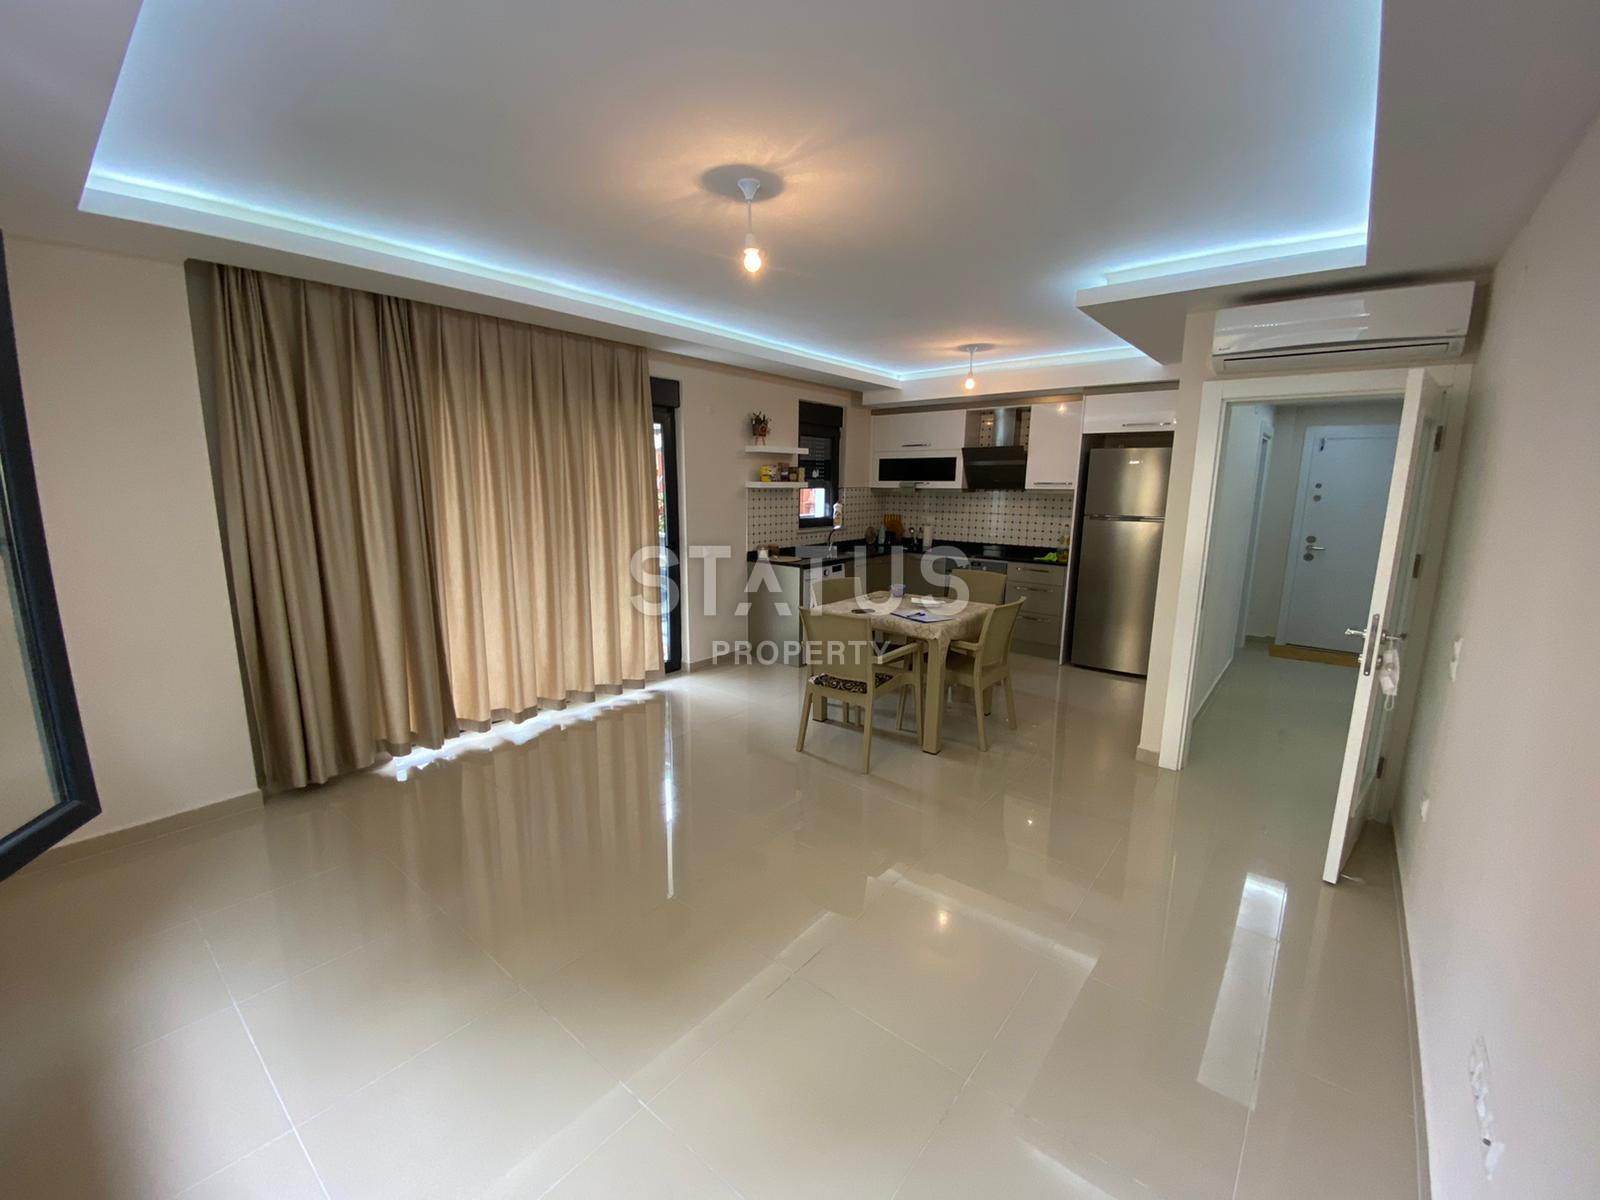 Furnished 2+1 apartment in the center of Alanya. 95m2 фото 1